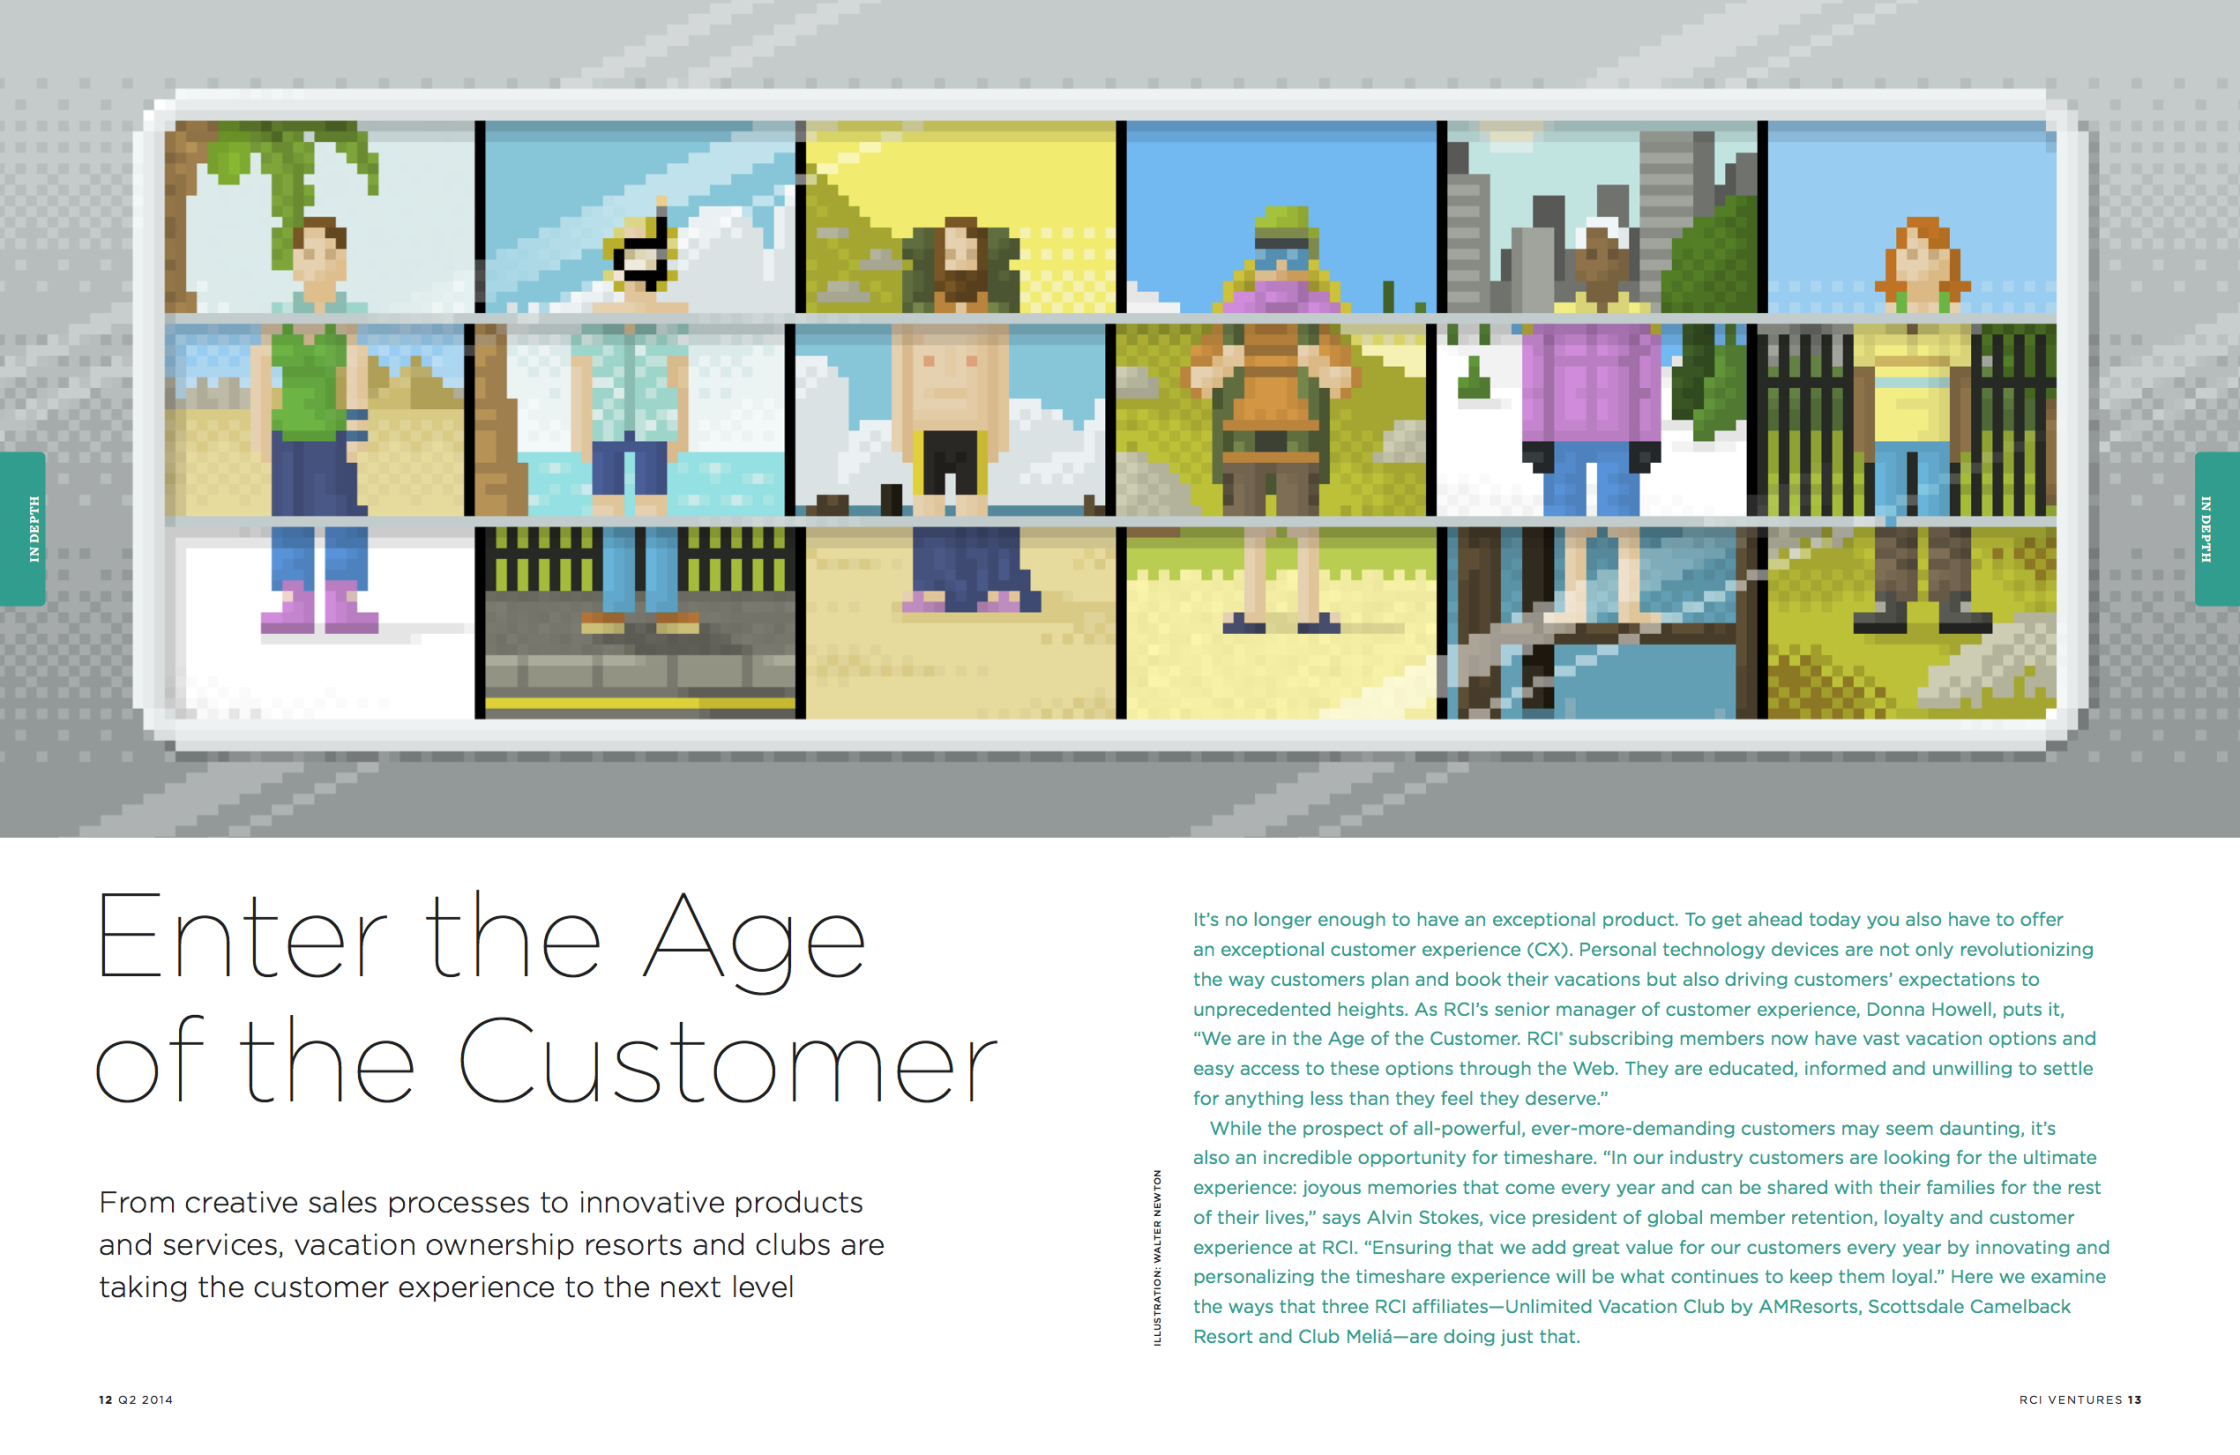 Ventures - Age of the Customer